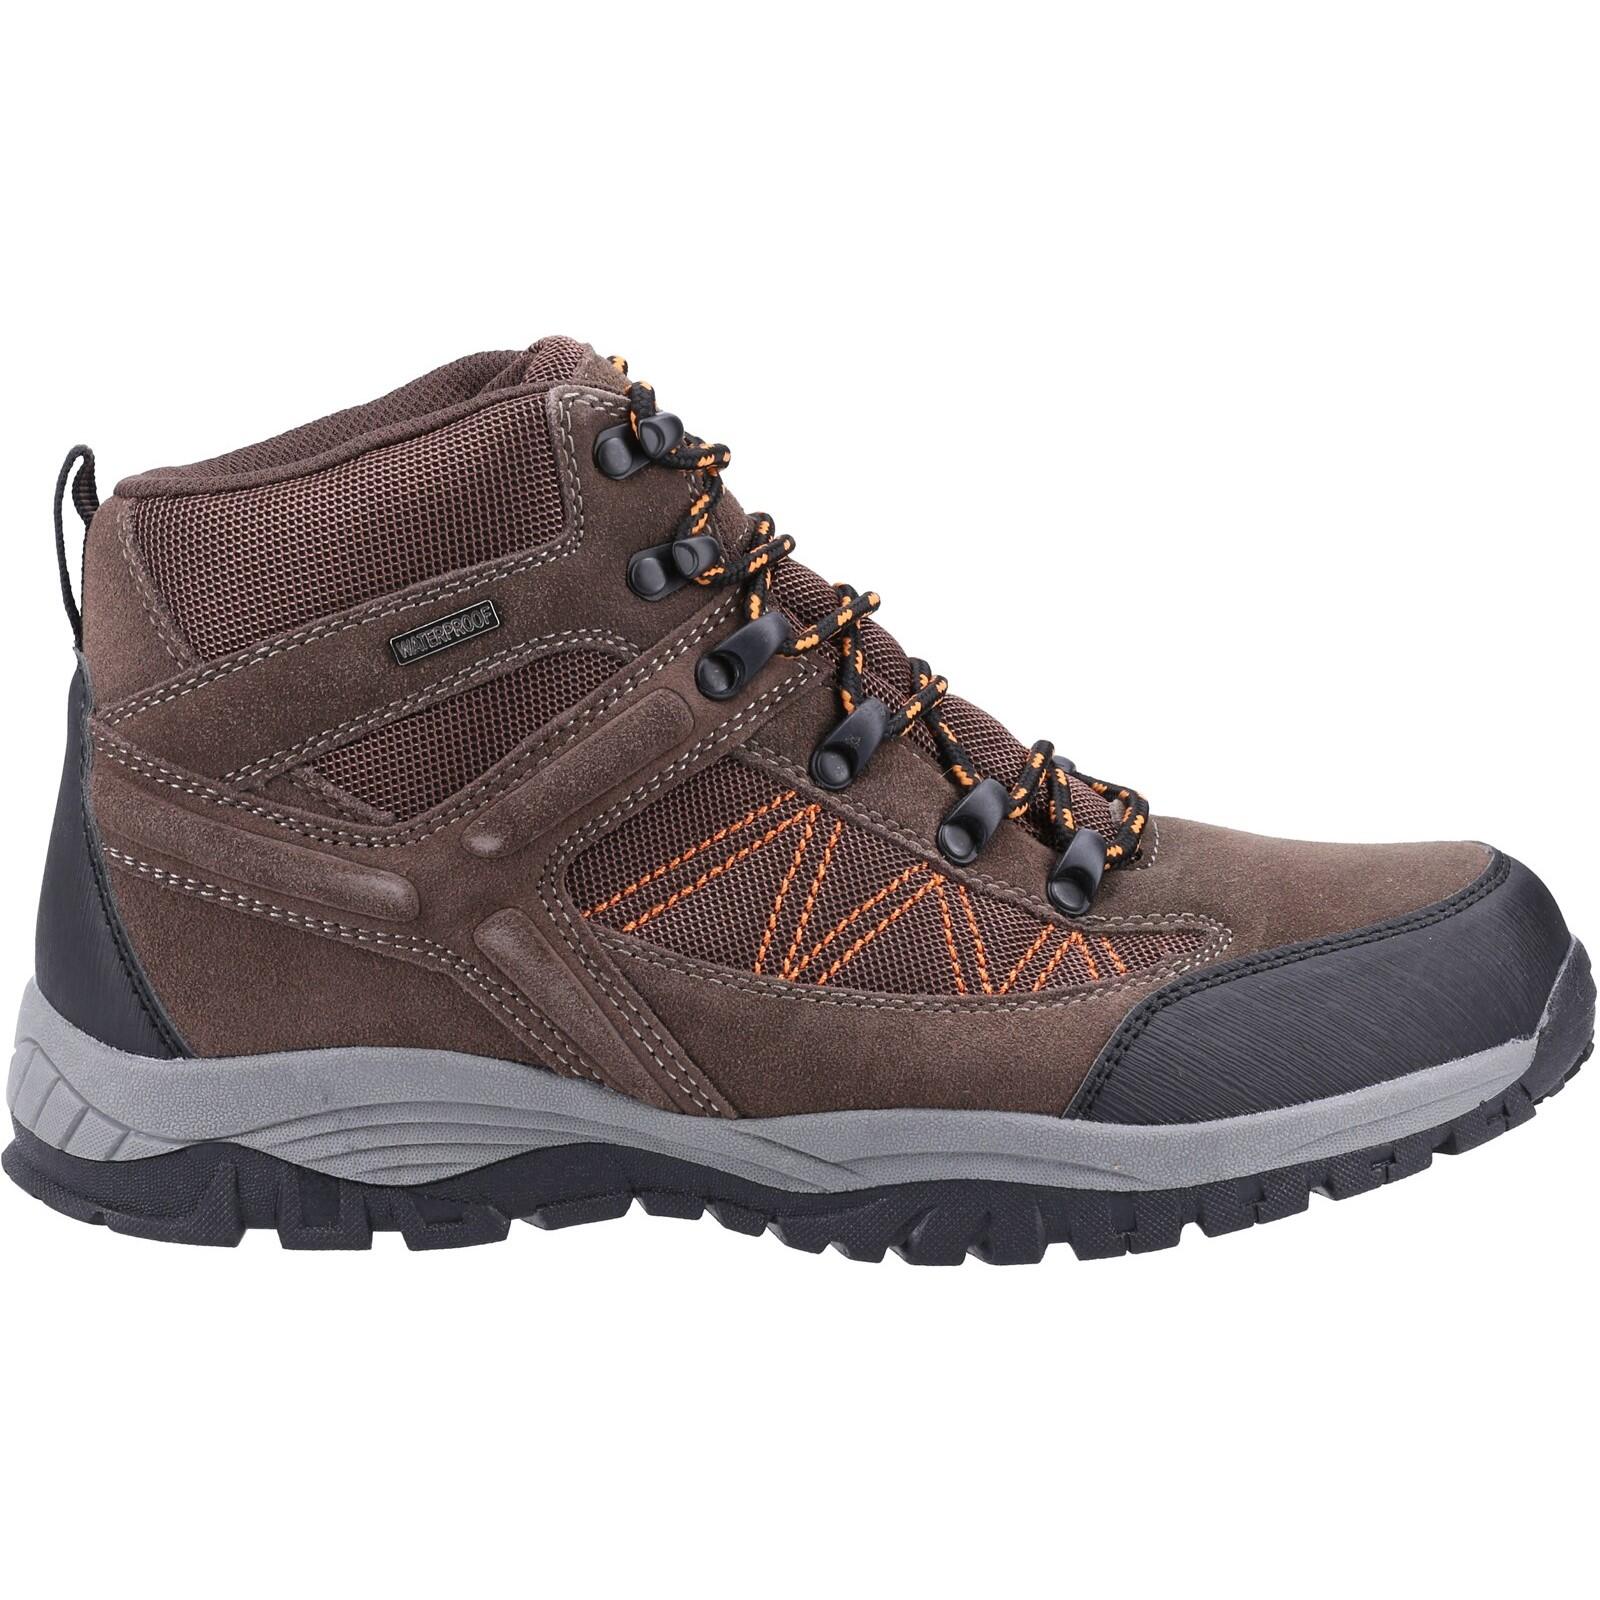 COTSWOLD Maisemore Mens Mens Hiking Boots BROWN